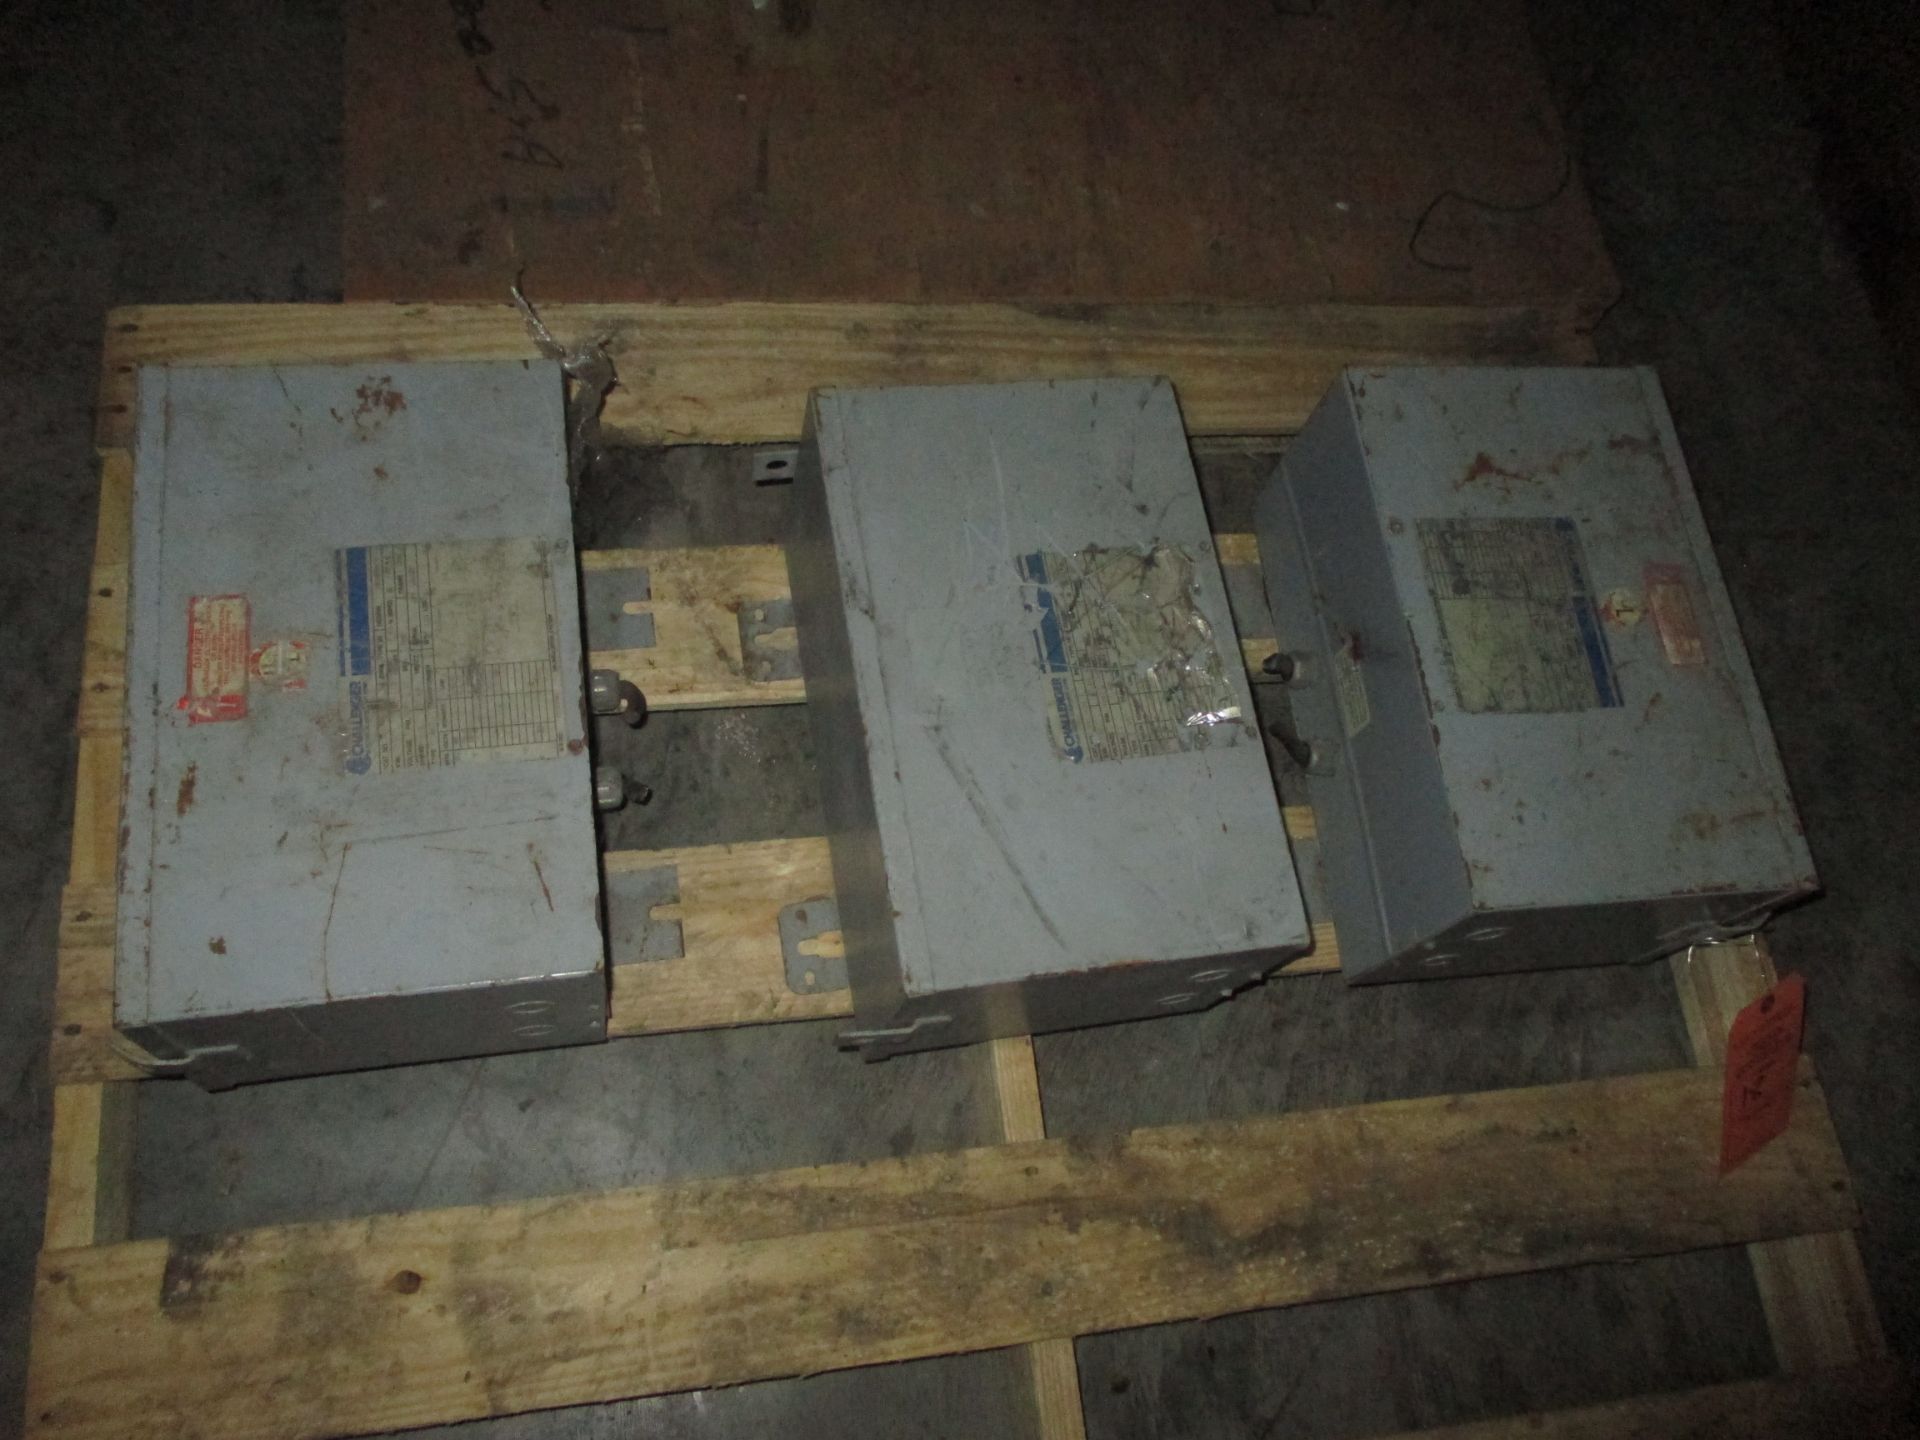 (3) CHALLENGER TRANSFORMERS; CAT# 301424; 3KVA; 60HZ; 3PH; TYPE EPT; WT 124LBS(LOCATED AT 7939